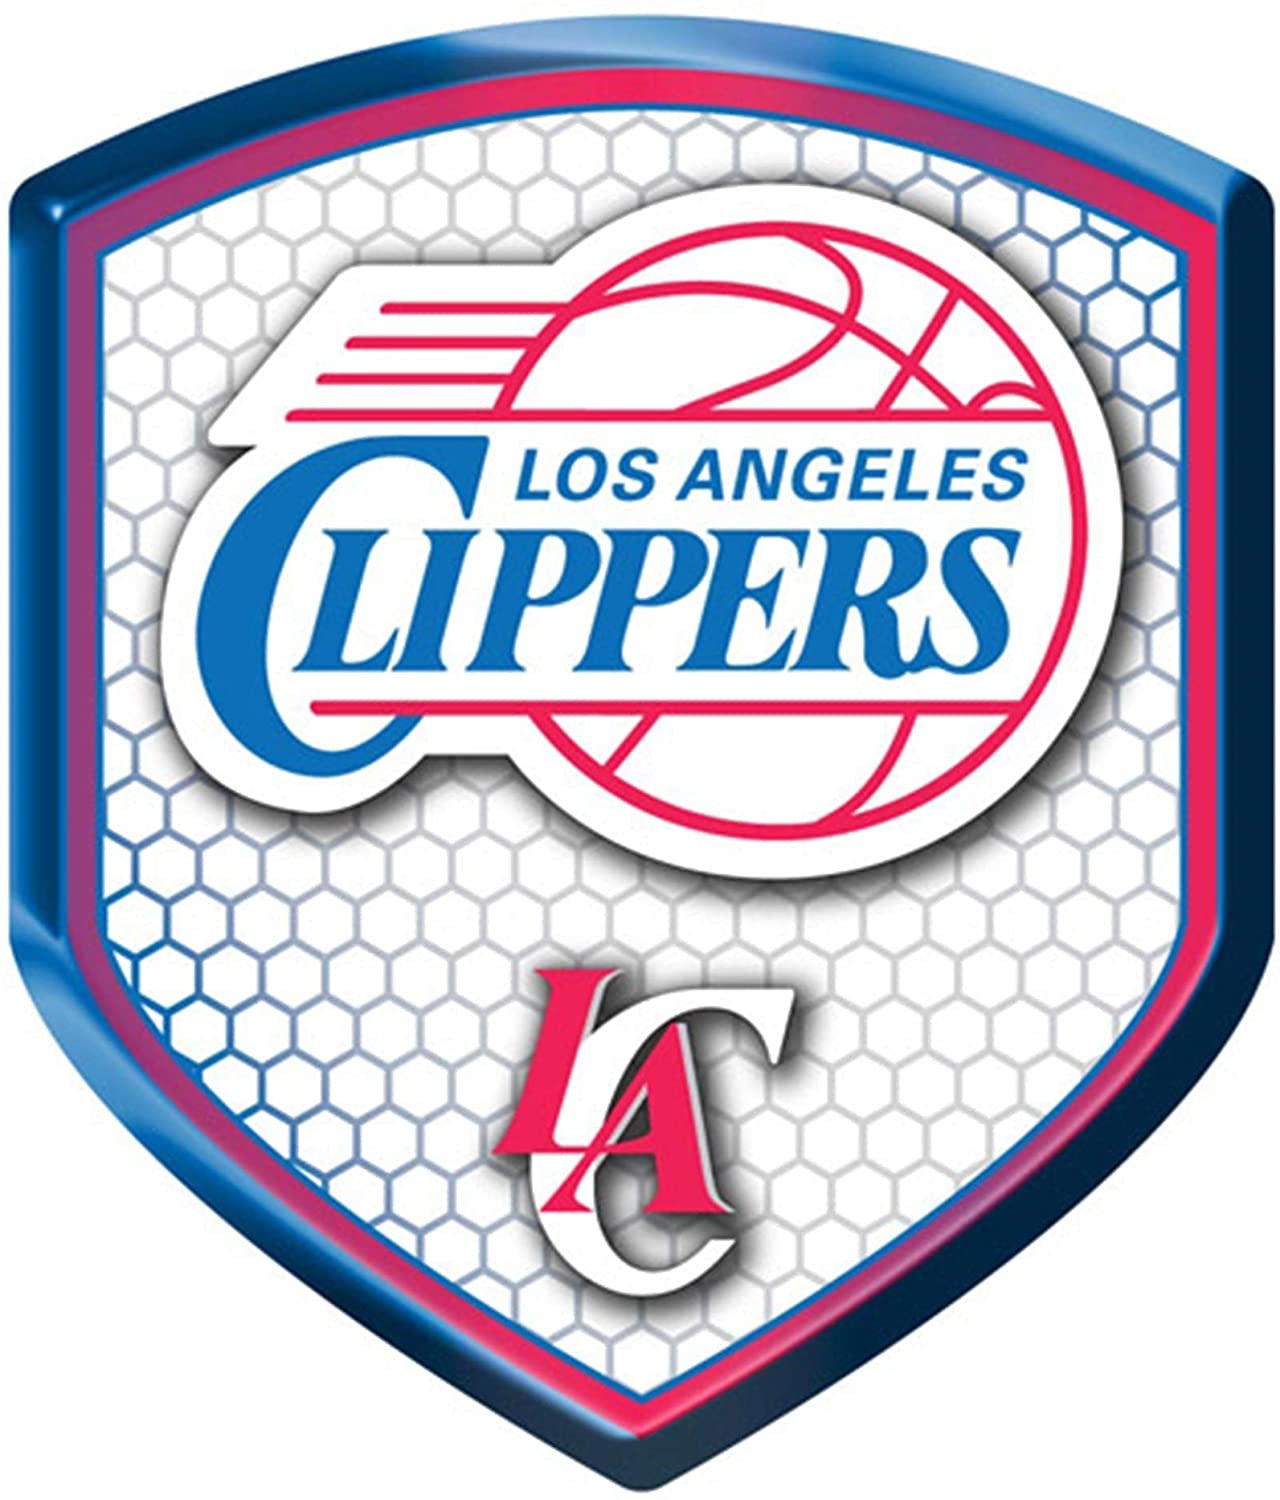 Los Angeles Clippers High Intensity Reflector, Shield Shape, Raised Decal Sticker, 2.5x3.5 Inch, Home or Auto, Full Adhesive Backing